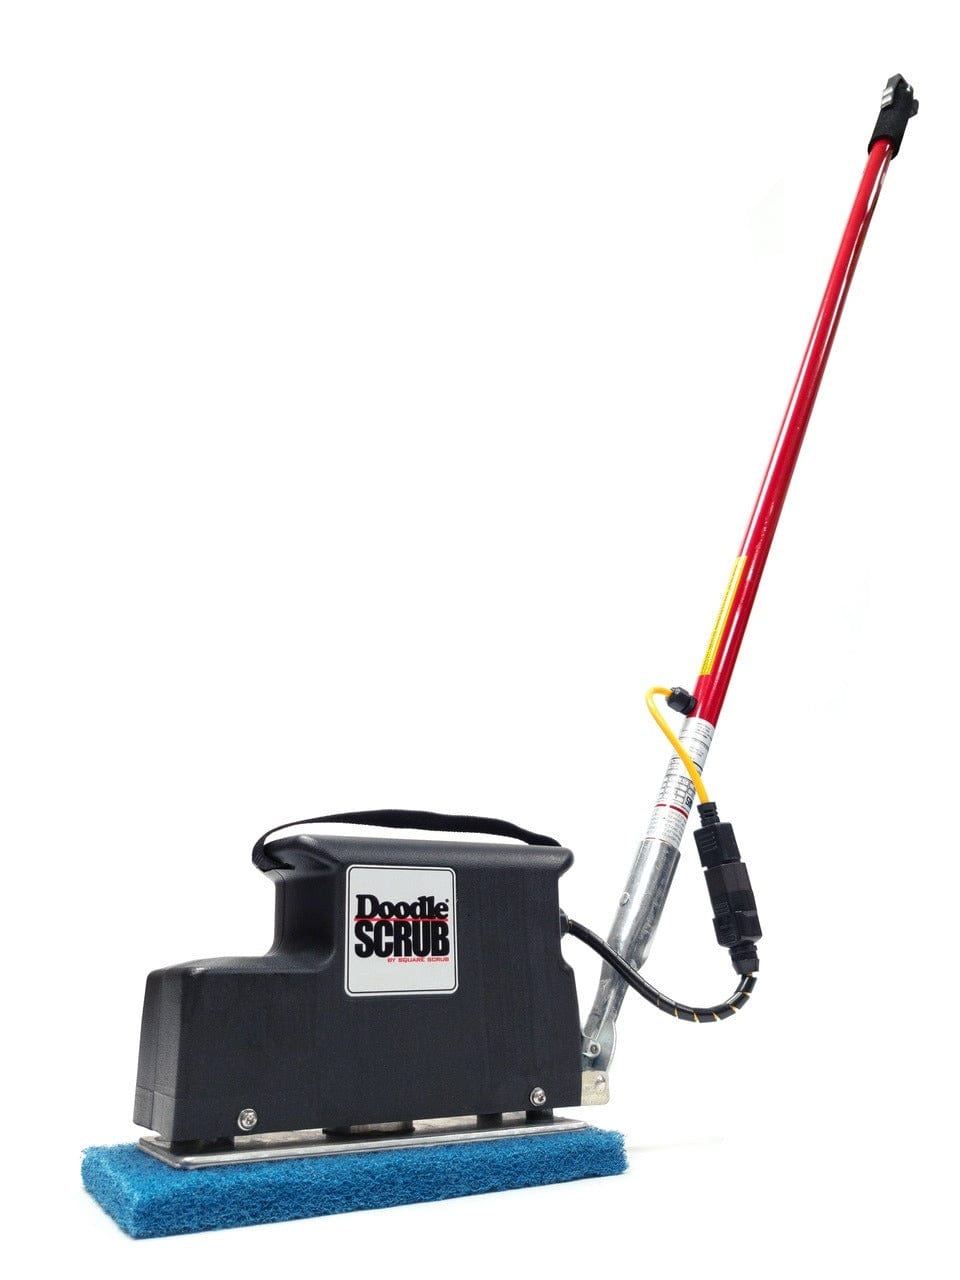 Doodle Scrub Floor Scrubber - Xtreme Polishing Systems: concrete cleaning machine, commercial concrete floor cleaner, and commercial concrete scrubber.